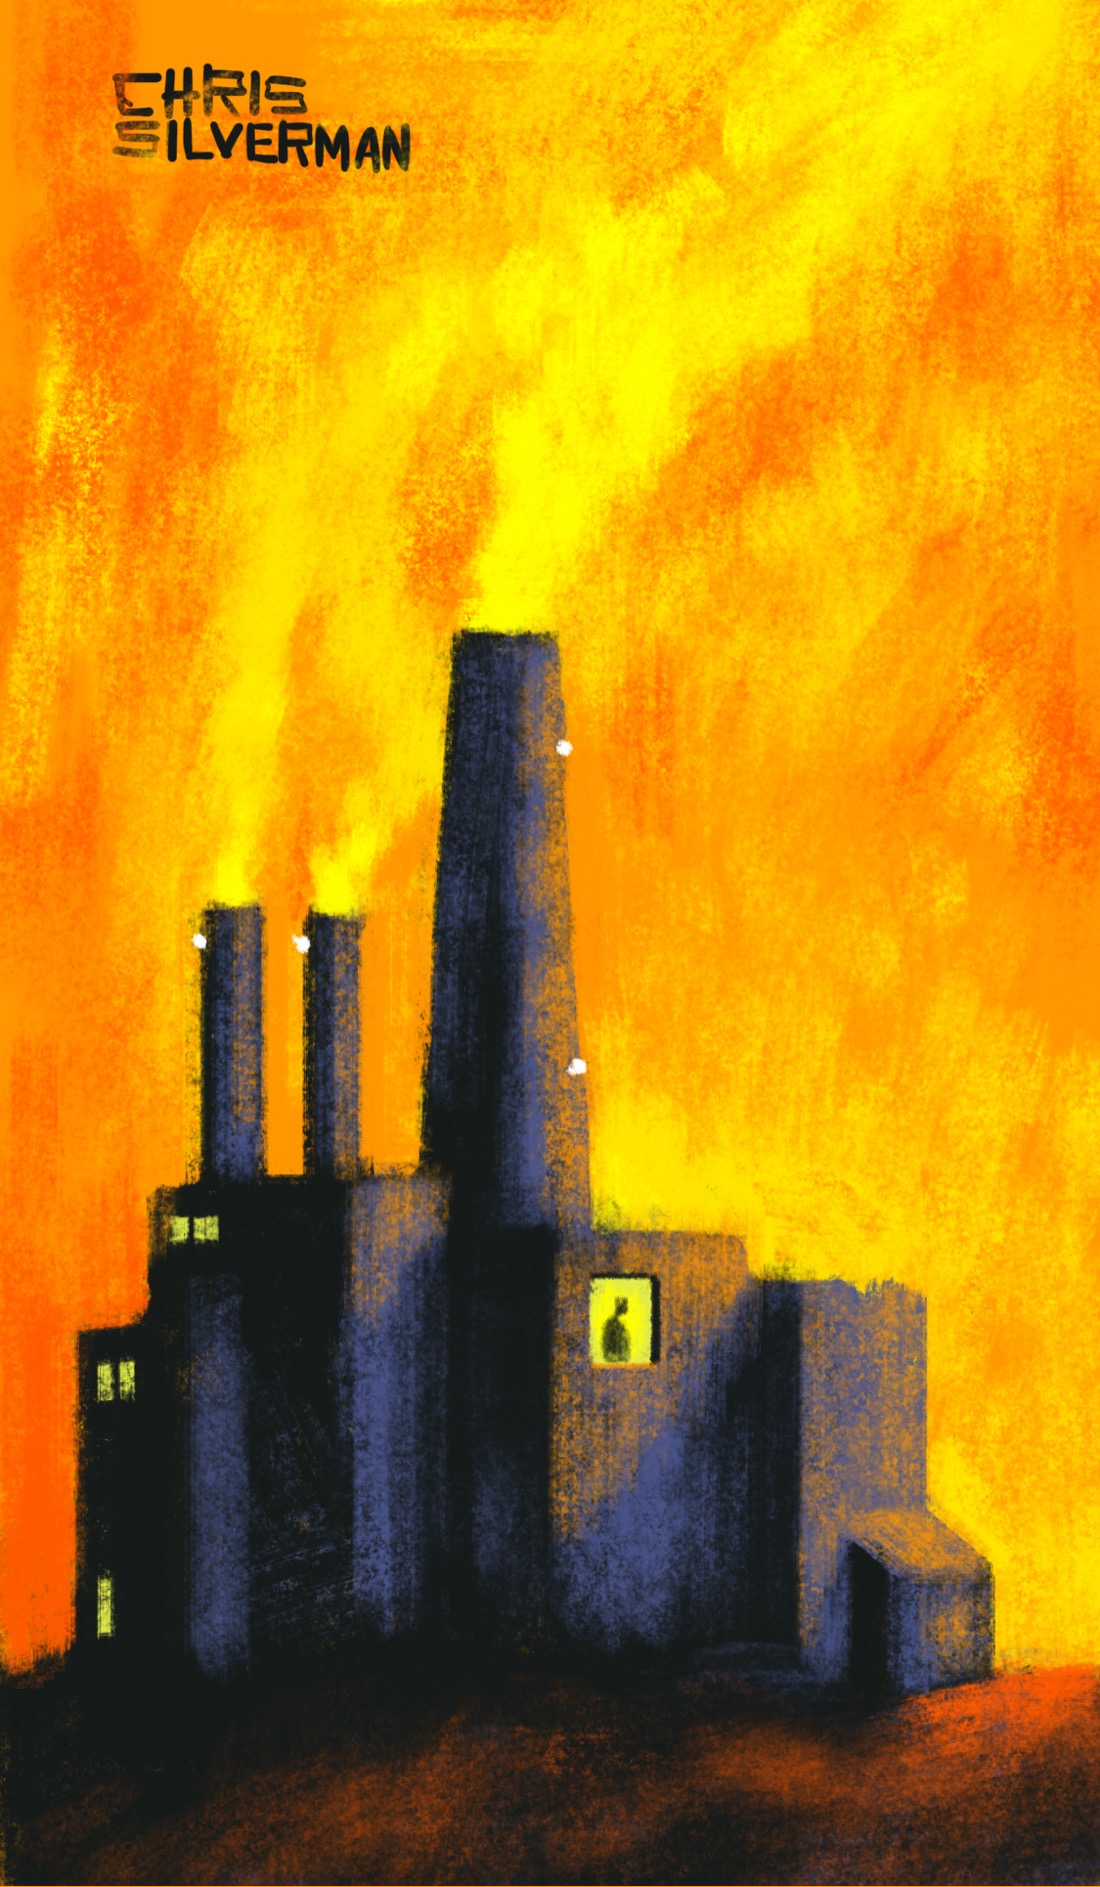 A huge factory with three smokestacks billowing smoke. The factory is heavy, rendered in black and dark purple; it stands against a blazing yellow and orange sky that appears to be on fire. The smoke from the smokestacks is yellow. In one square window, on the right side of the factory, a single silhouette of a person is visible.